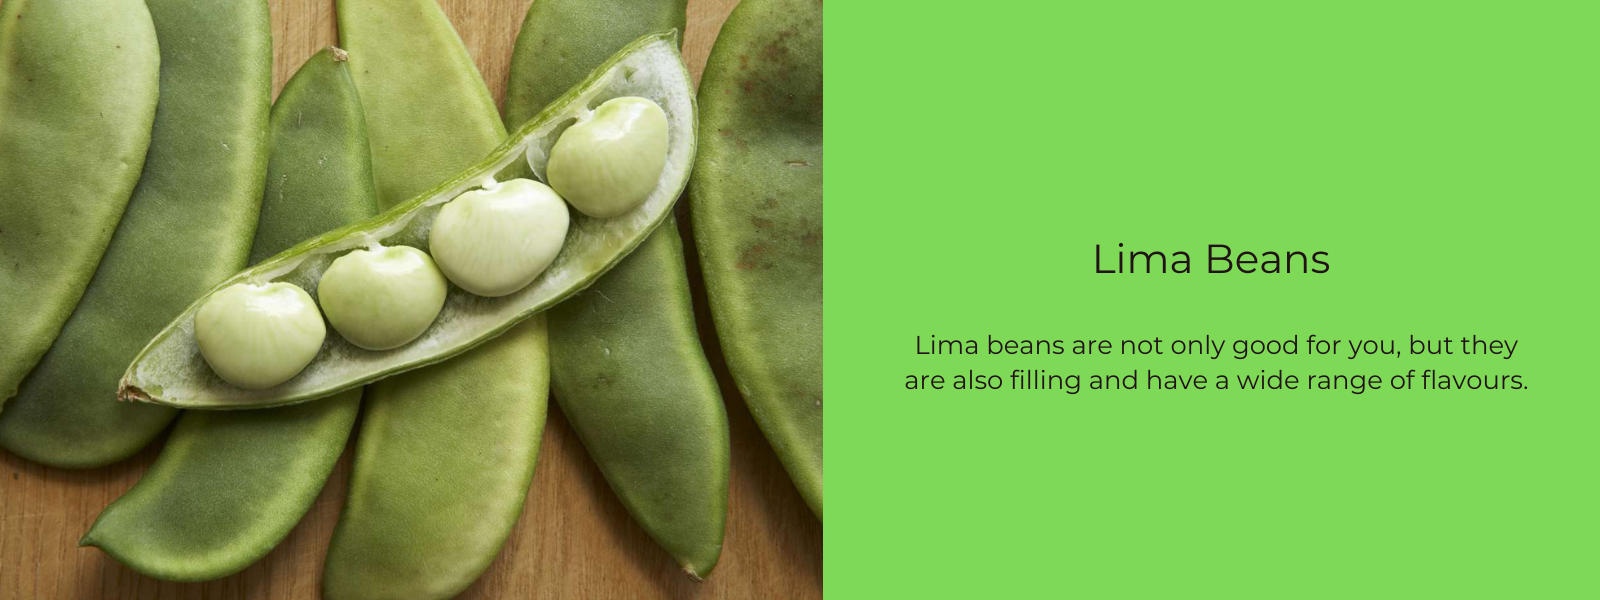 Lima Beans – Health Benefits, Uses and Important Facts